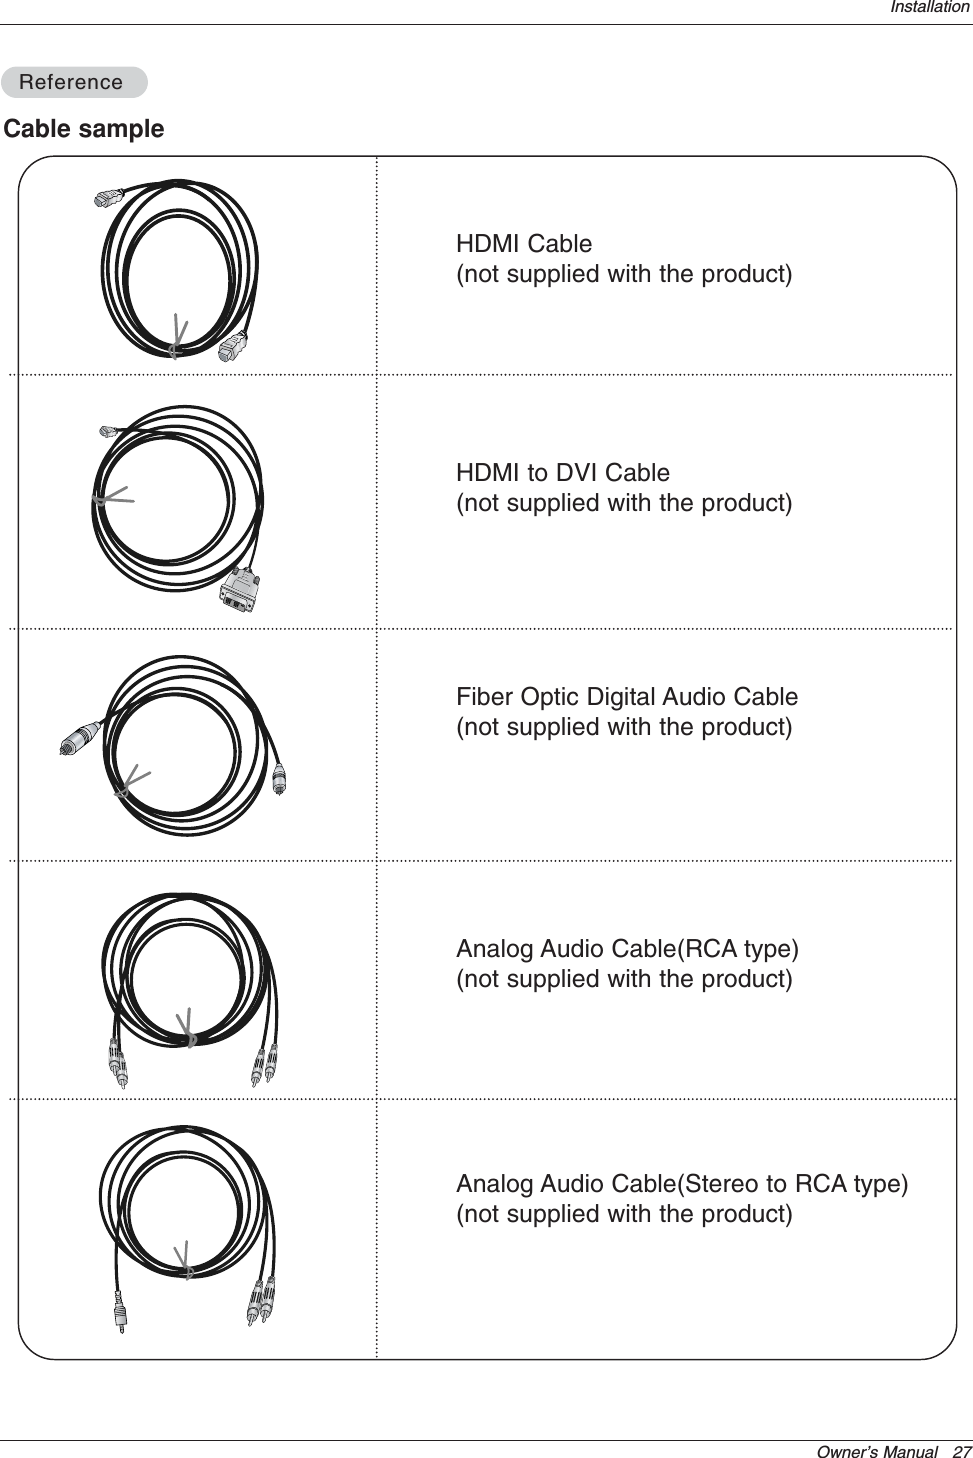 Owner’s Manual   27InstallationCable sampleHDMI Cable (not supplied with the product)HDMI to DVI Cable (not supplied with the product)Fiber Optic Digital Audio Cable(not supplied with the product)Analog Audio Cable(RCA type)(not supplied with the product)Analog Audio Cable(Stereo to RCA type)(not supplied with the product)ReferenceReference